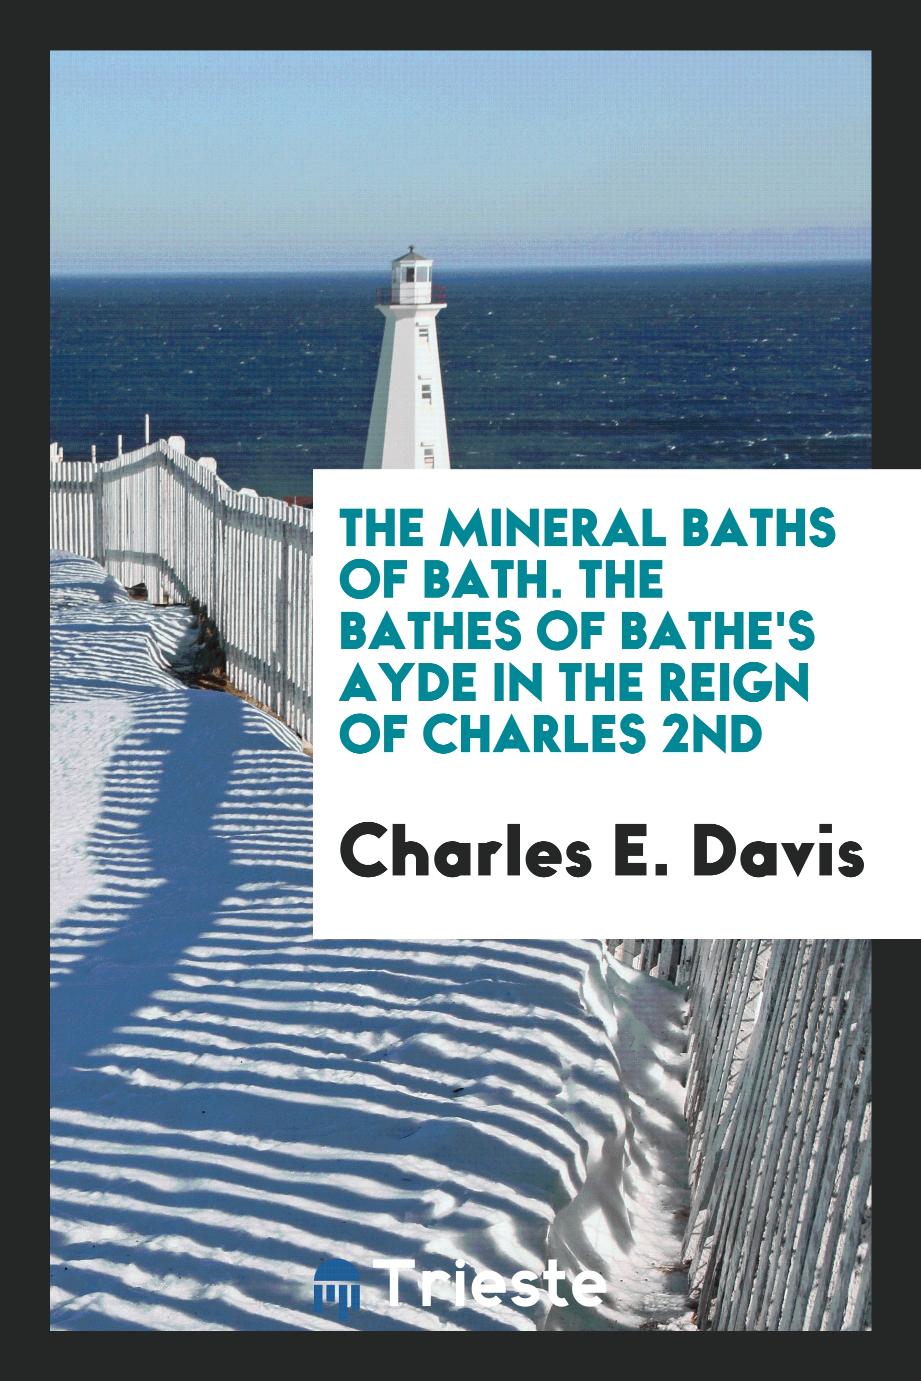 The Mineral Baths of Bath. The Bathes of Bathe's Ayde in the Reign of Charles 2nd